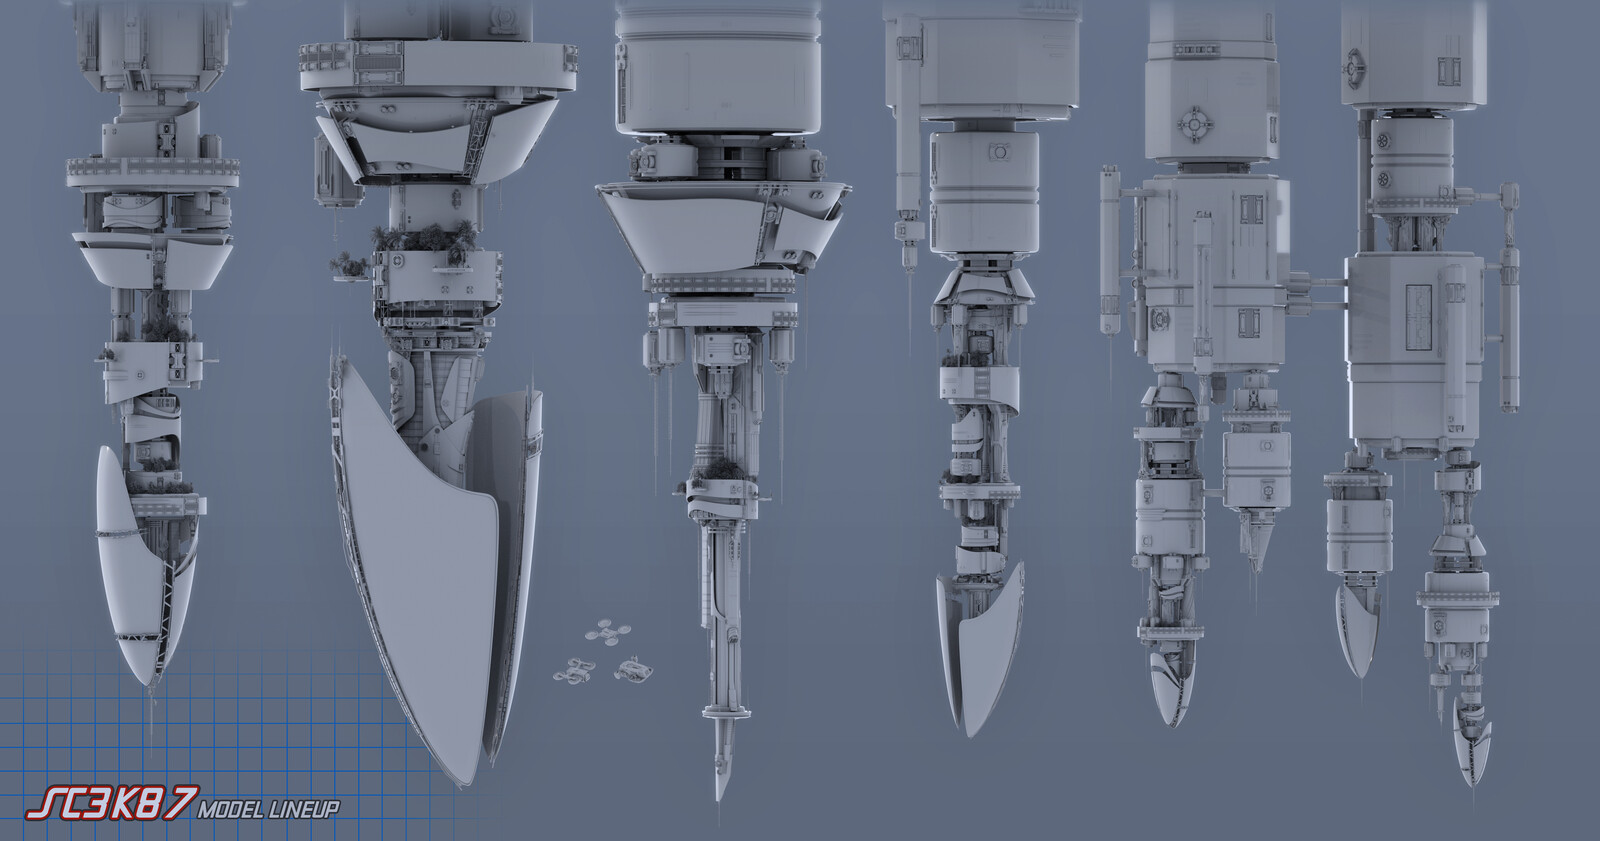 I modelled most of the tower structures in ZBrush, but I also made use of several Kitbash 3D kits to help add detail